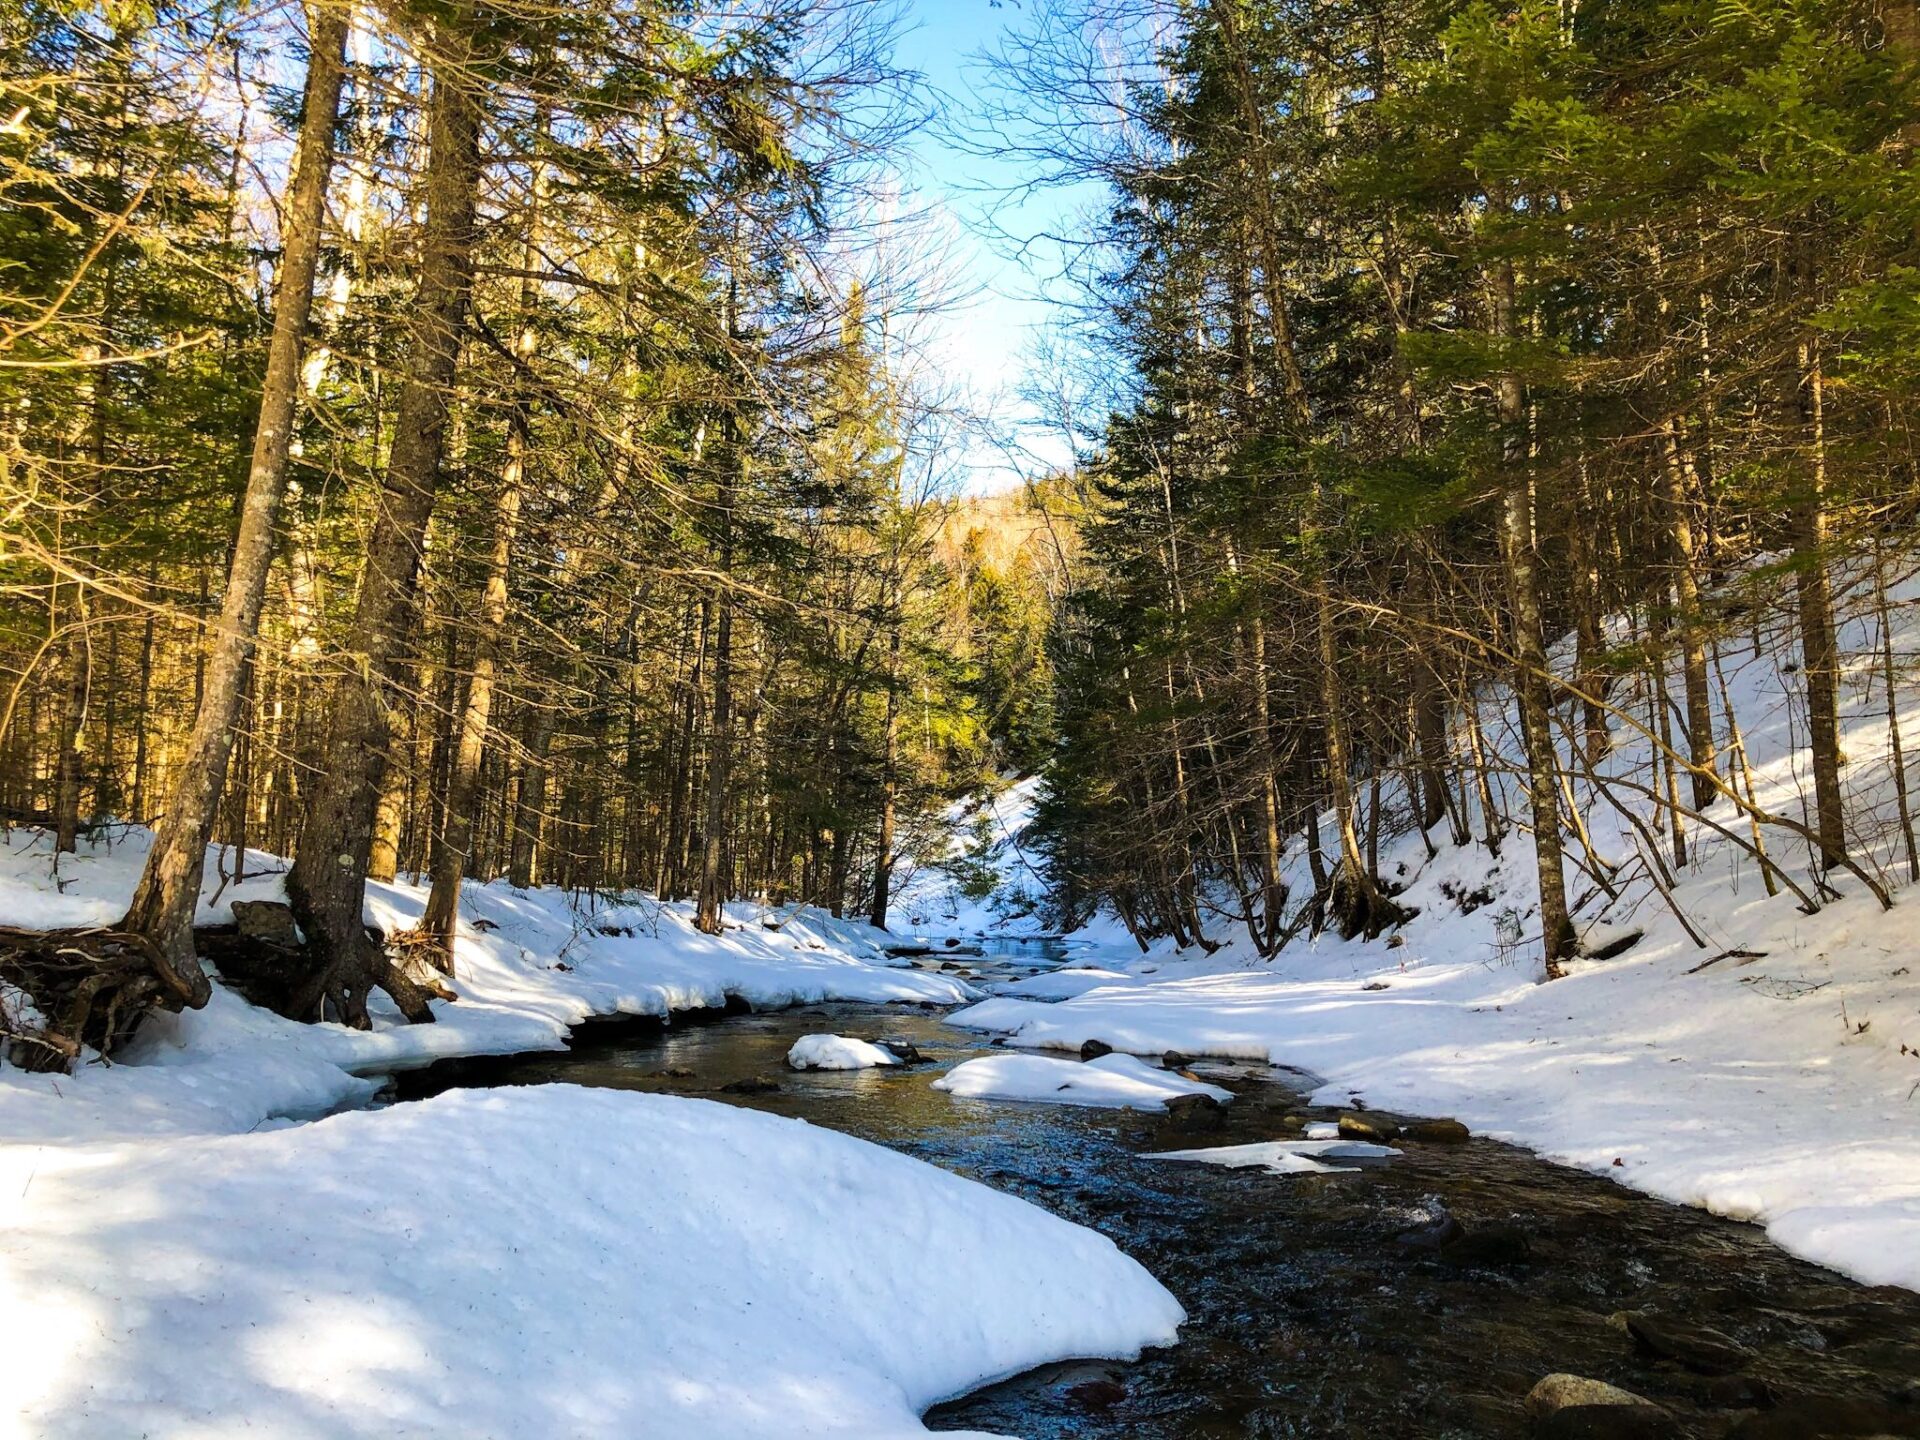 Snow covered river leading into forest of trees with blue sky above